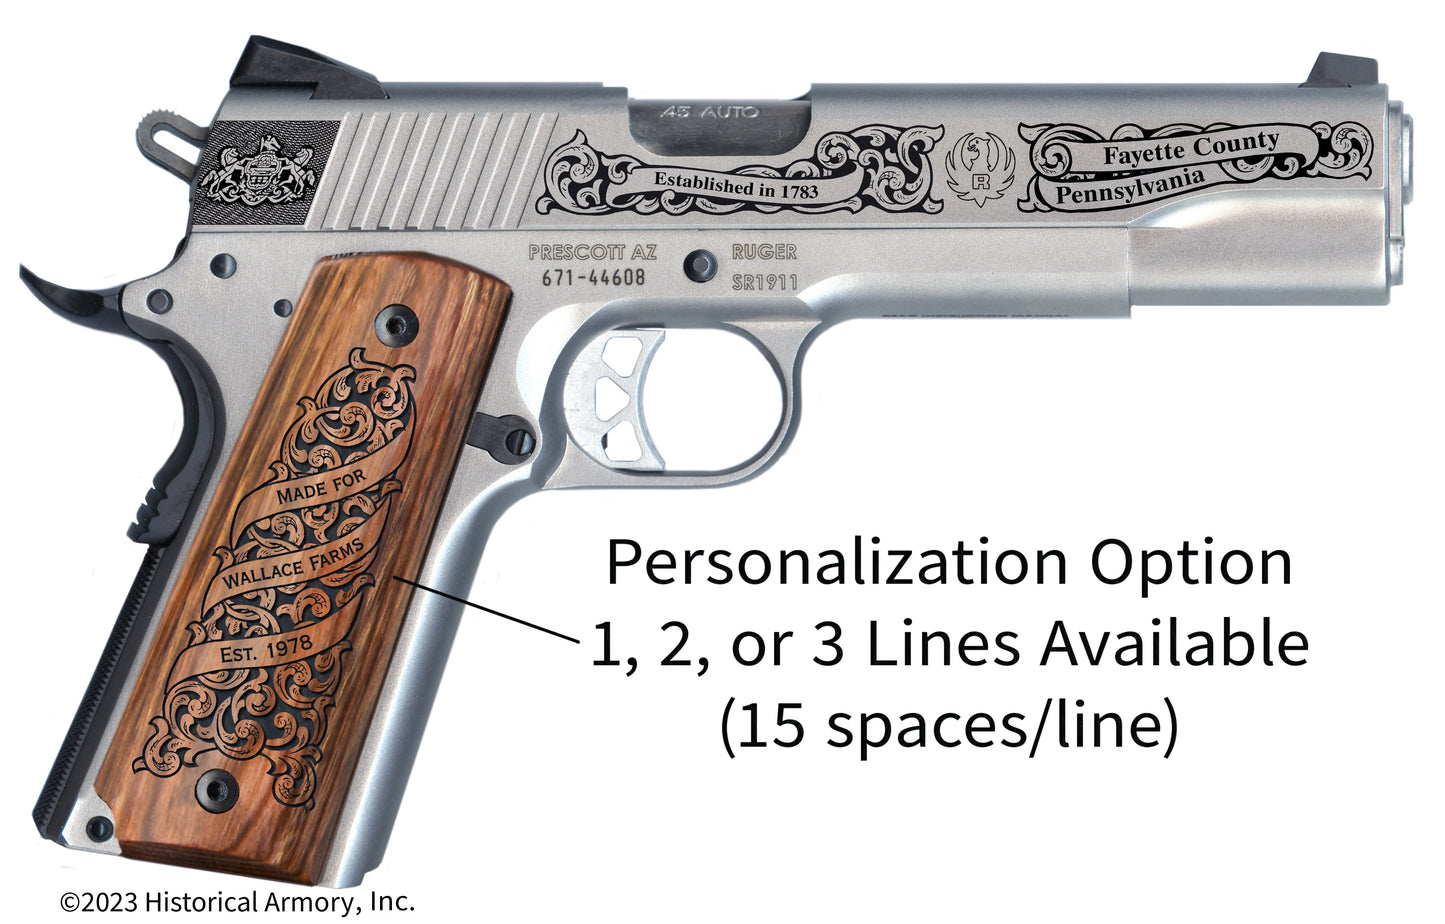 Fayette County Pennsylvania Personalized Engraved .45 Auto Ruger 1911